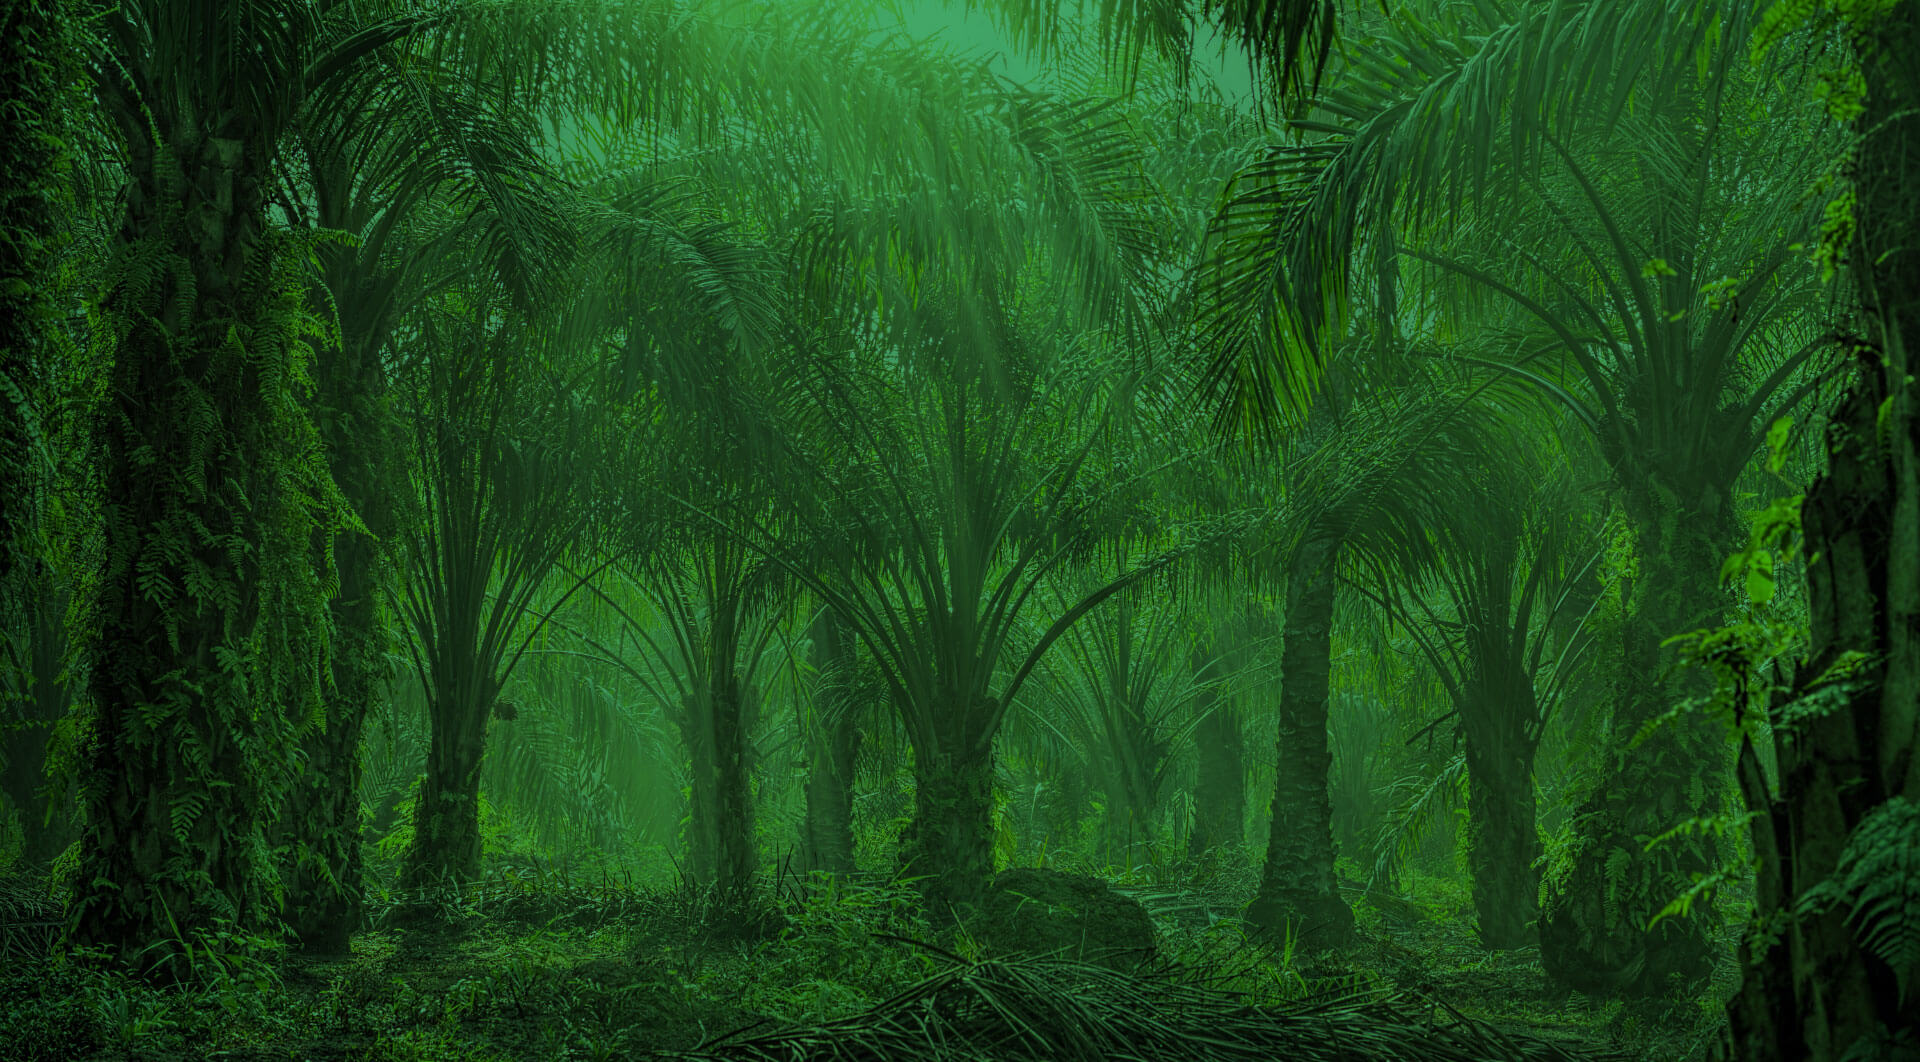 [Live Webinar] Issues And Challenges Of Biodiversity Conservation In The Palm Oil Industry In Malaysia